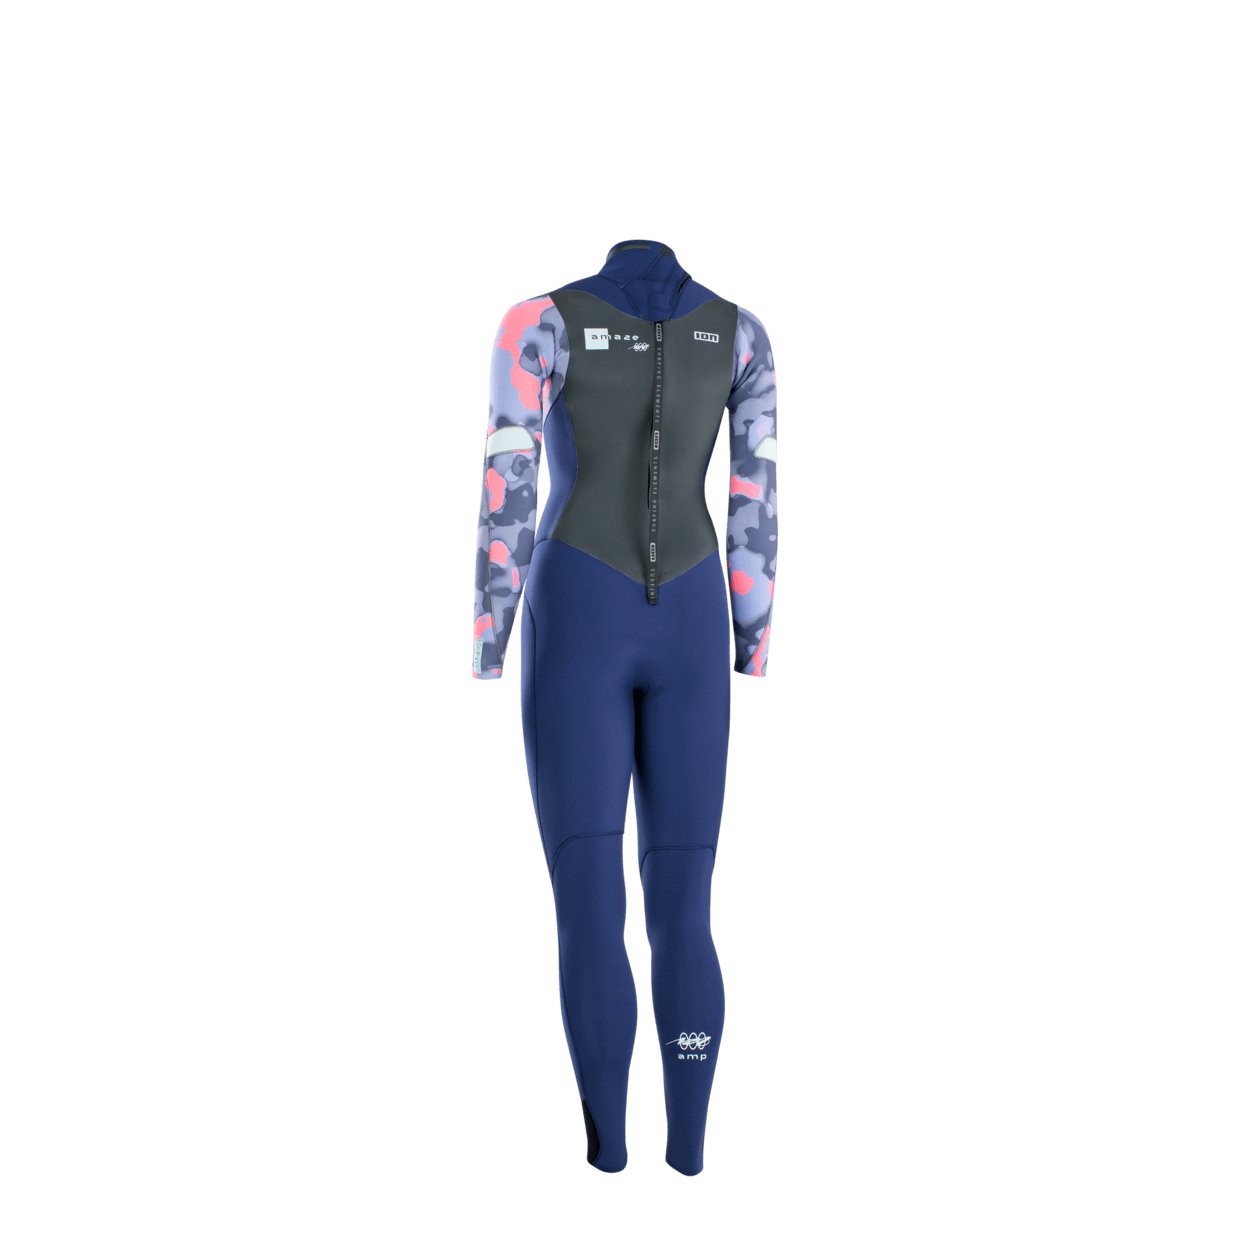 ION Women Wetsuit Amaze Amp 4/3 Back Zip 2023 - Worthing Watersports - 9010583057514 - Wetsuits - ION Water